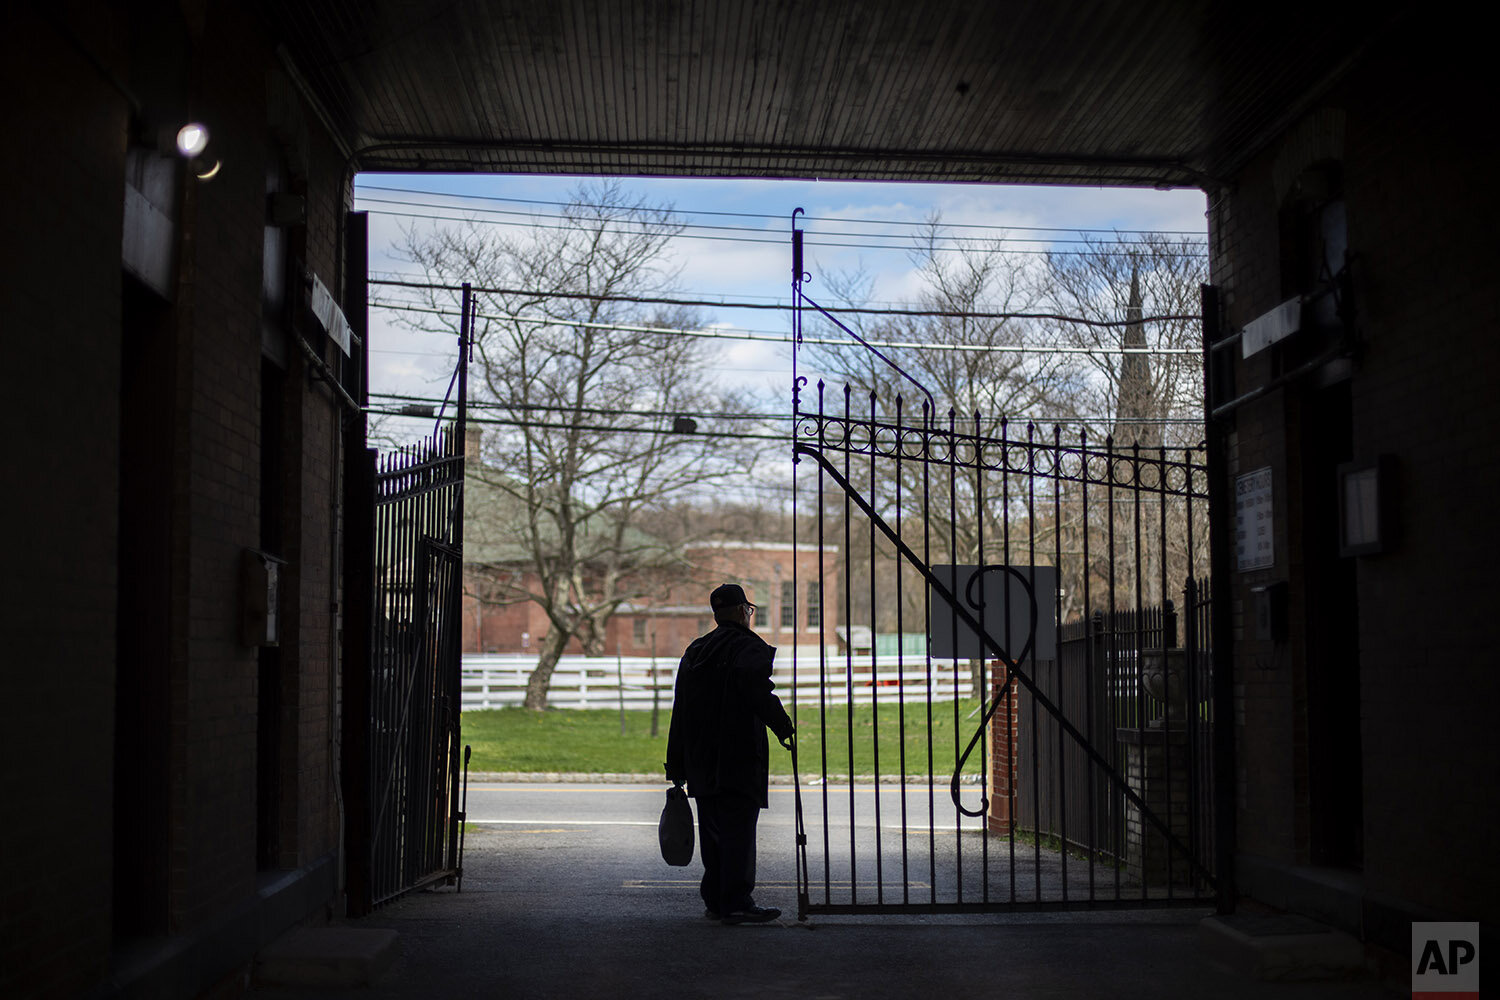  Rabbi Shmuel Plafker closes the gates after another day of keeping pace with a surge in burials, most of them deaths from coronavirus, at the Hebrew Free Burial Association's cemetery in the Staten Island borough of New York, Wednesday, April 8, 202